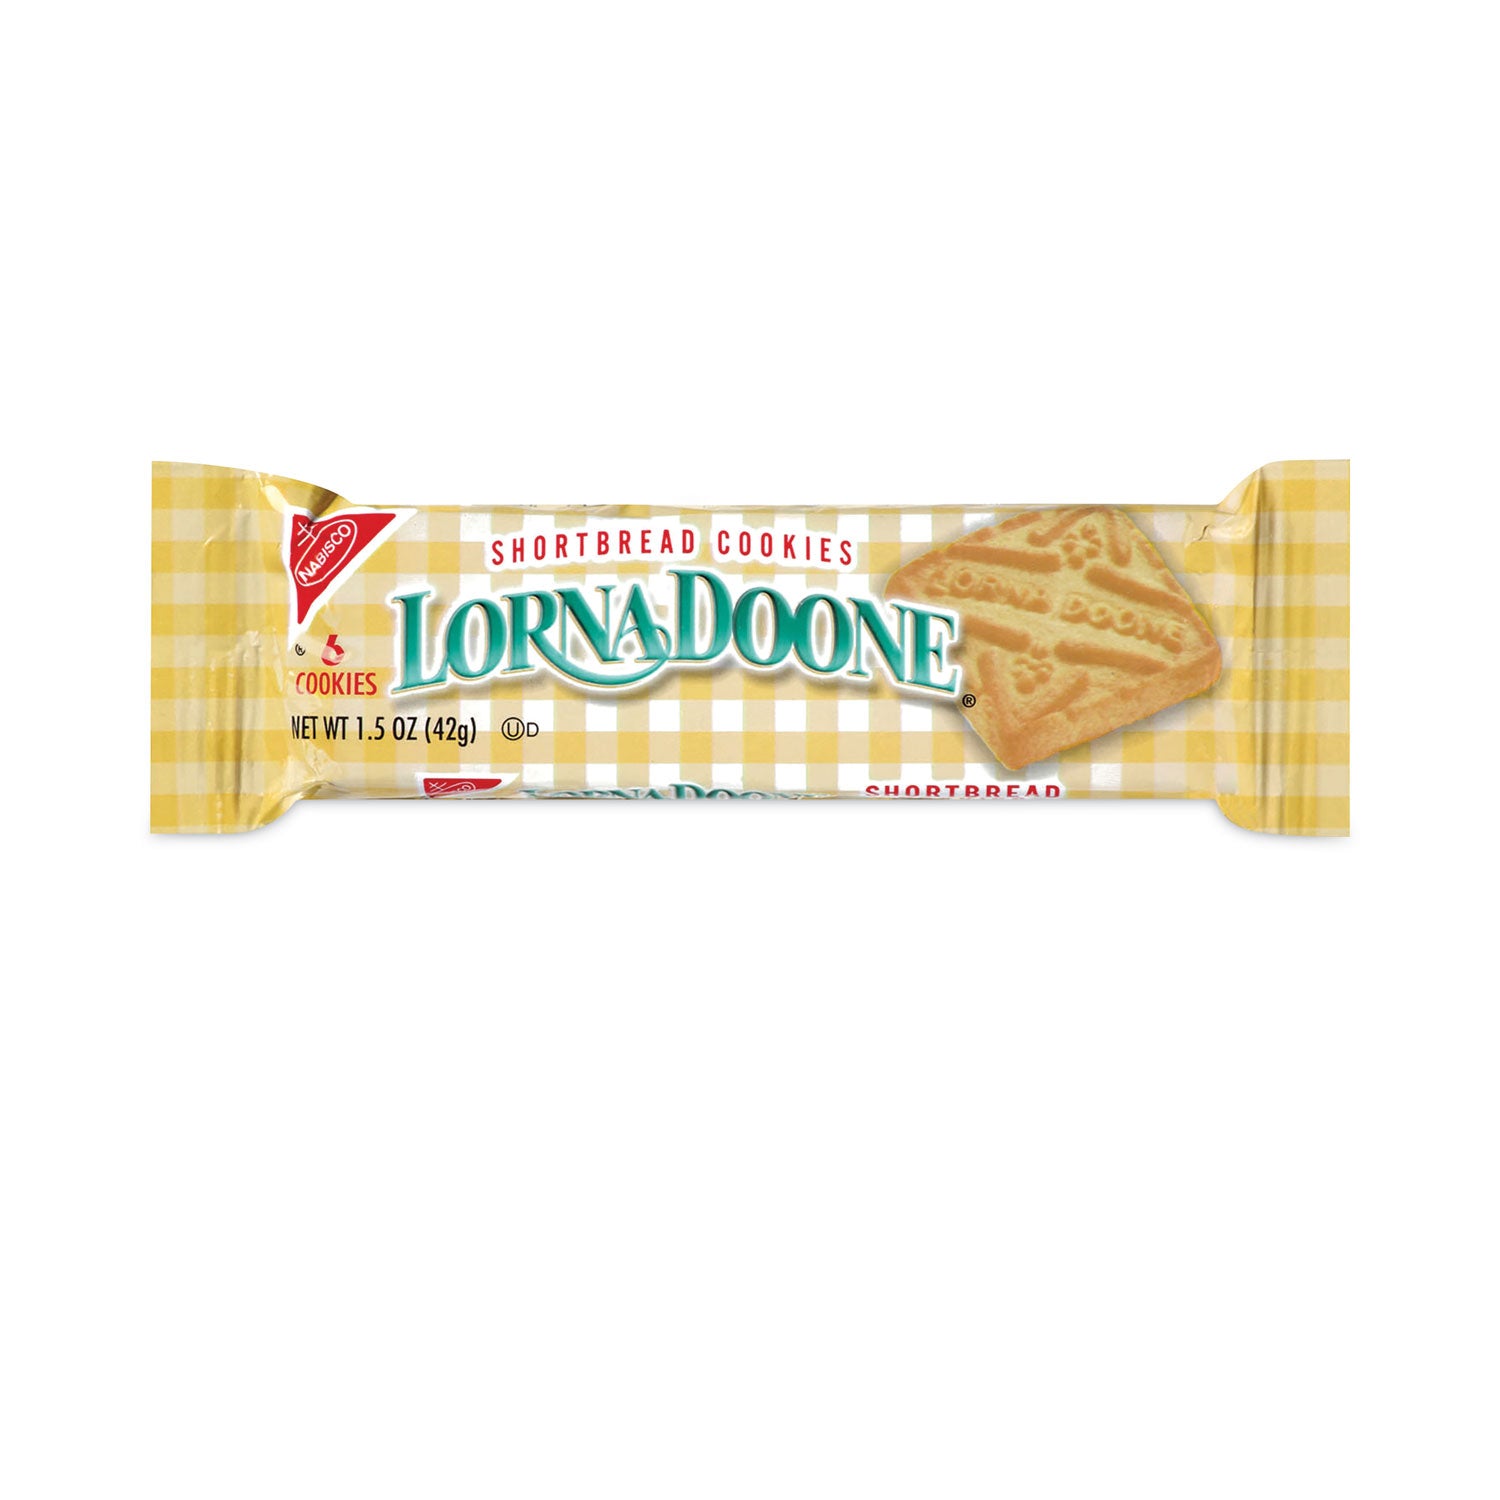 lorna-doone-shortbread-cookies-15-oz-packet-30-packets-carton-ships-in-1-3-business-days_grr22001042 - 1